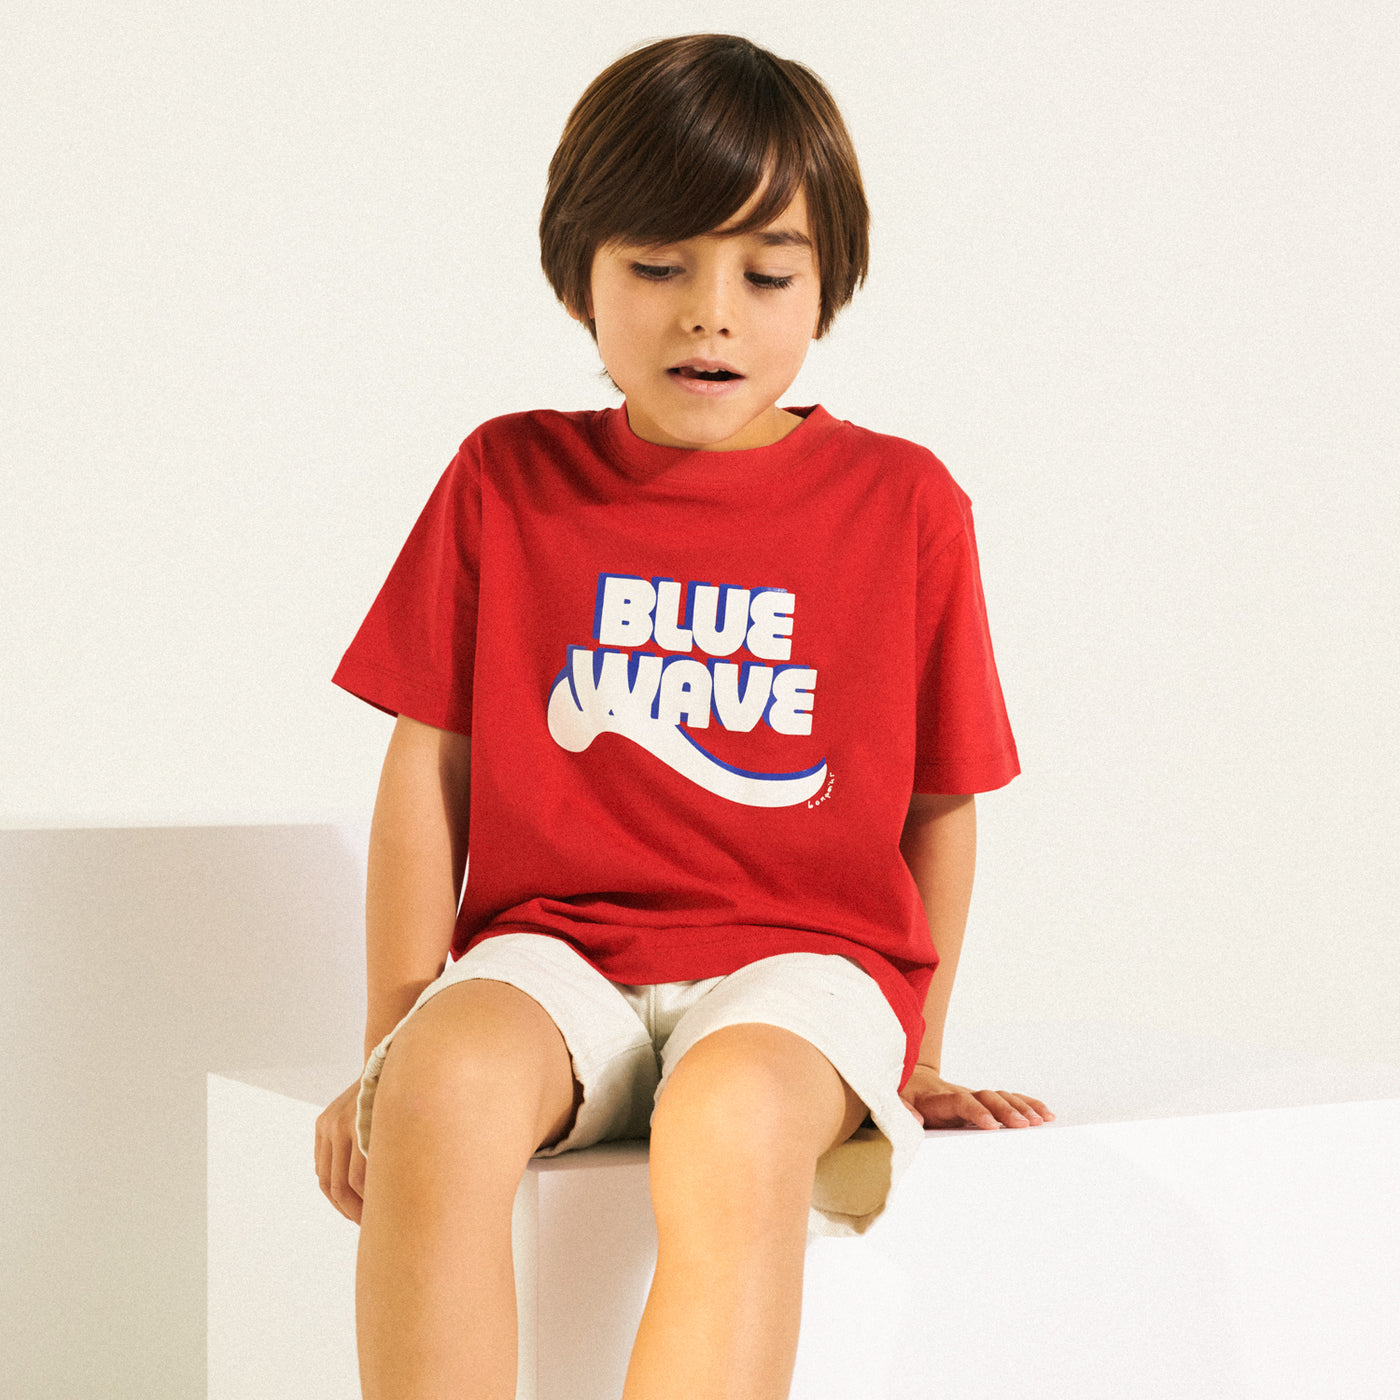 Boy in graphic red shirt from Bonpoint Spring Summer 2022 Collection